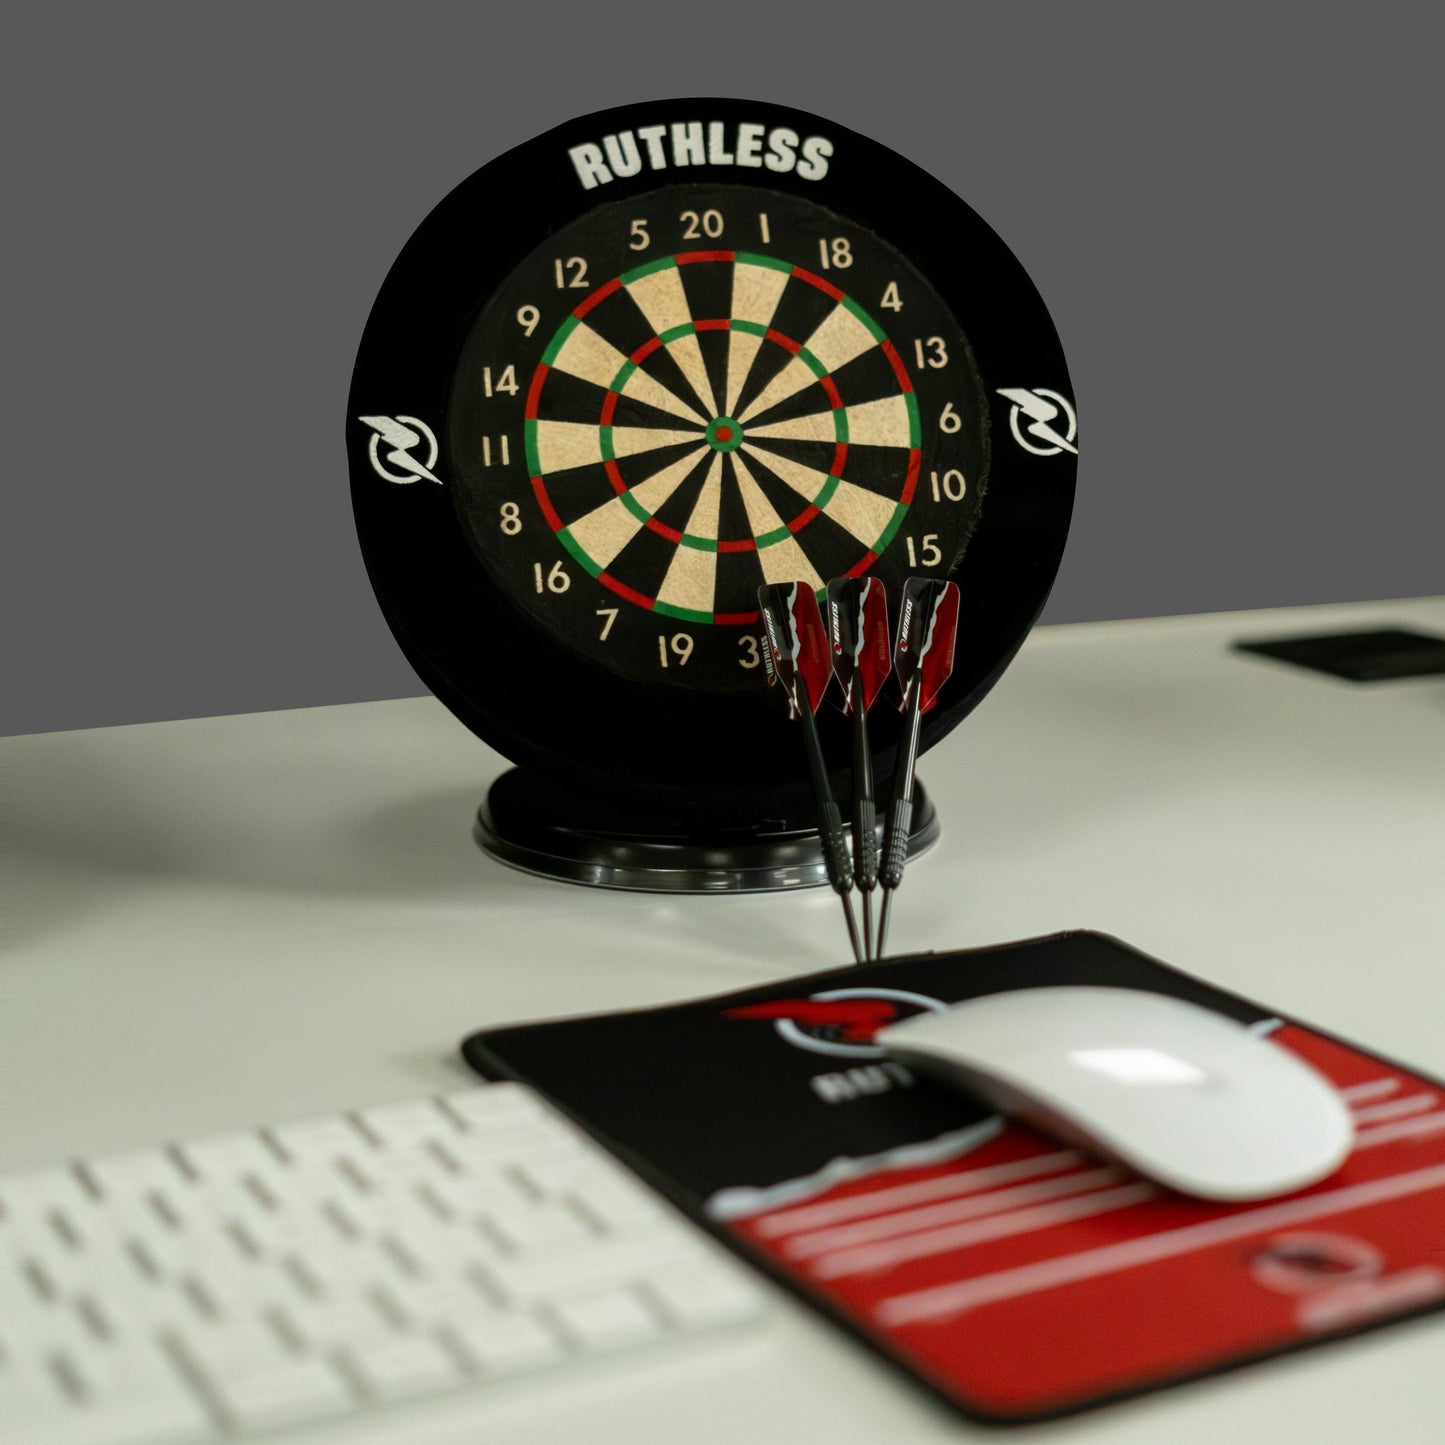 Ruthless Mini Desktop Dartboard - 6 Inch - Desk Version or Wall Mountable - Complete with Darts